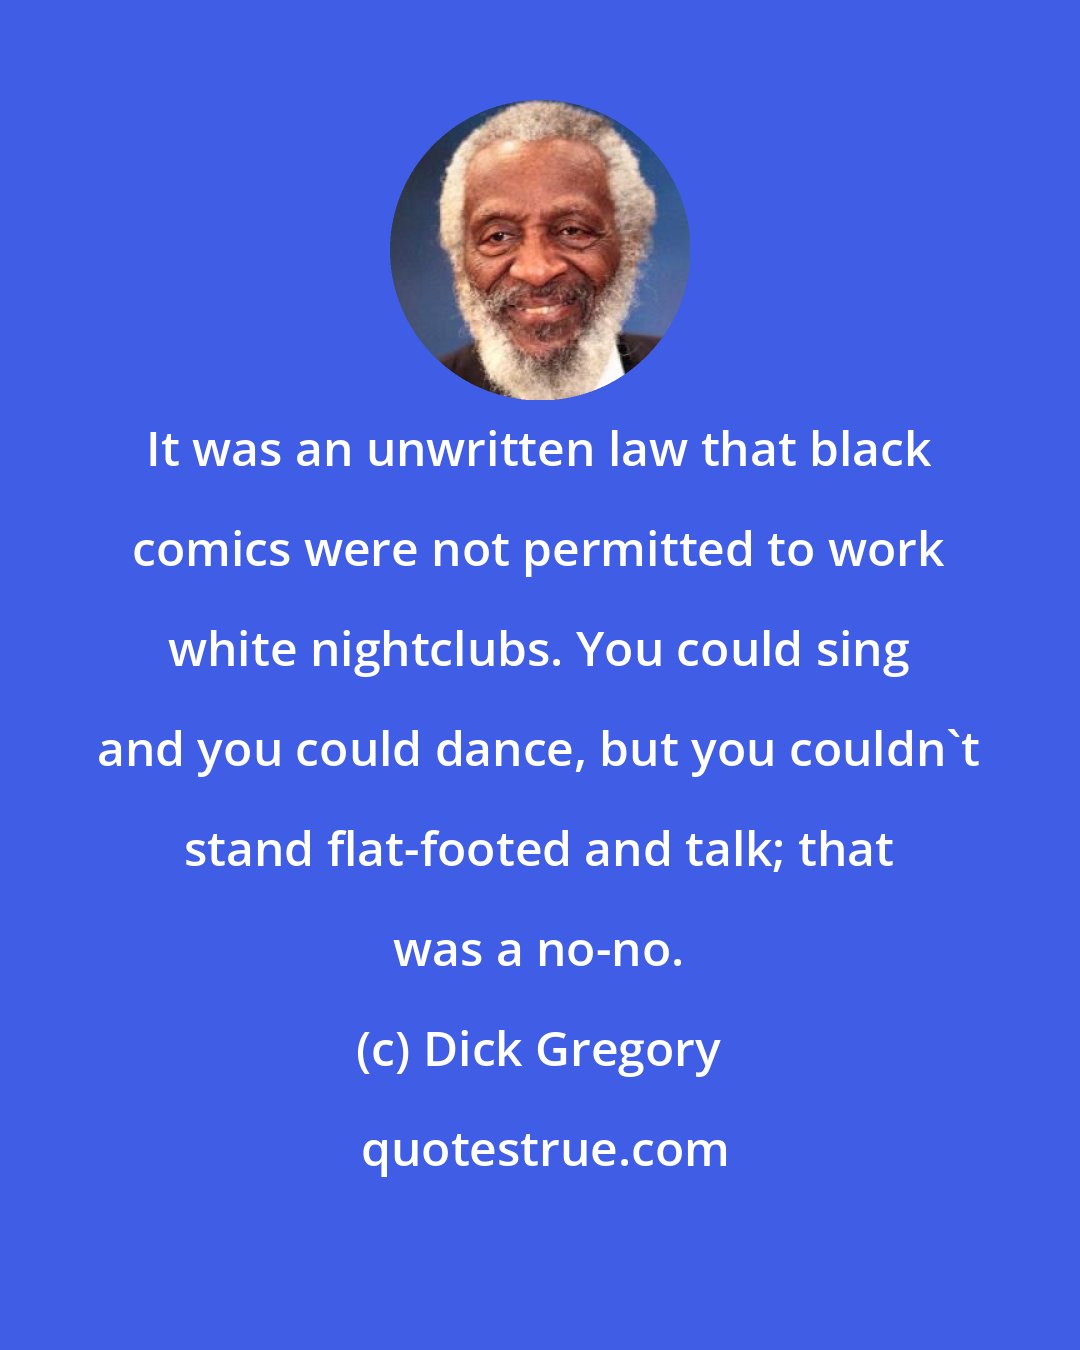 Dick Gregory: It was an unwritten law that black comics were not permitted to work white nightclubs. You could sing and you could dance, but you couldn't stand flat-footed and talk; that was a no-no.